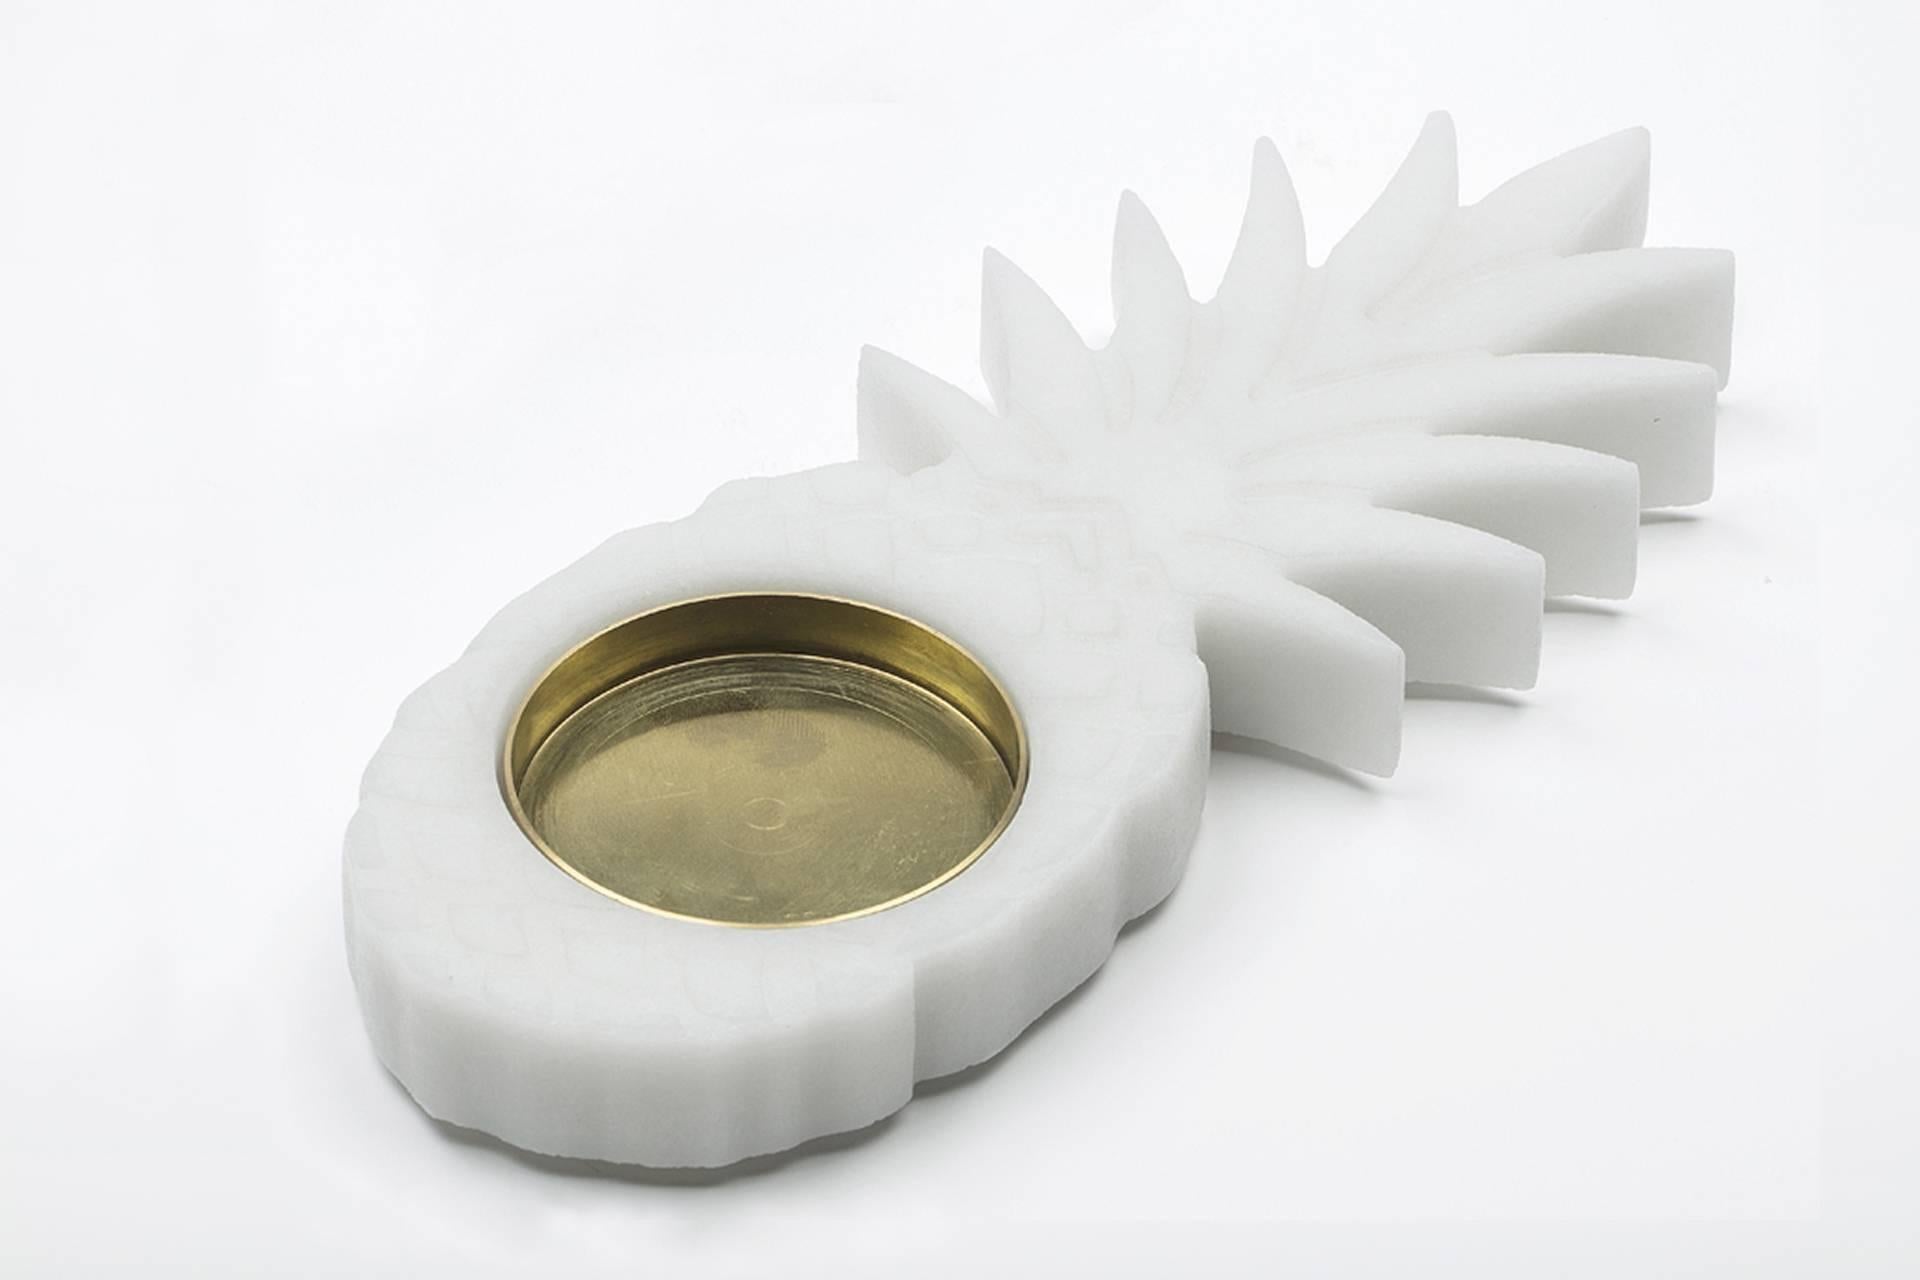 Small white Carrara marble ashtray with pineapple shape and brass plate. Each piece is in a way unique (since each marble block is different in veins and shades) and handcrafted in Italy. Slight variations in shape, color and size are to be